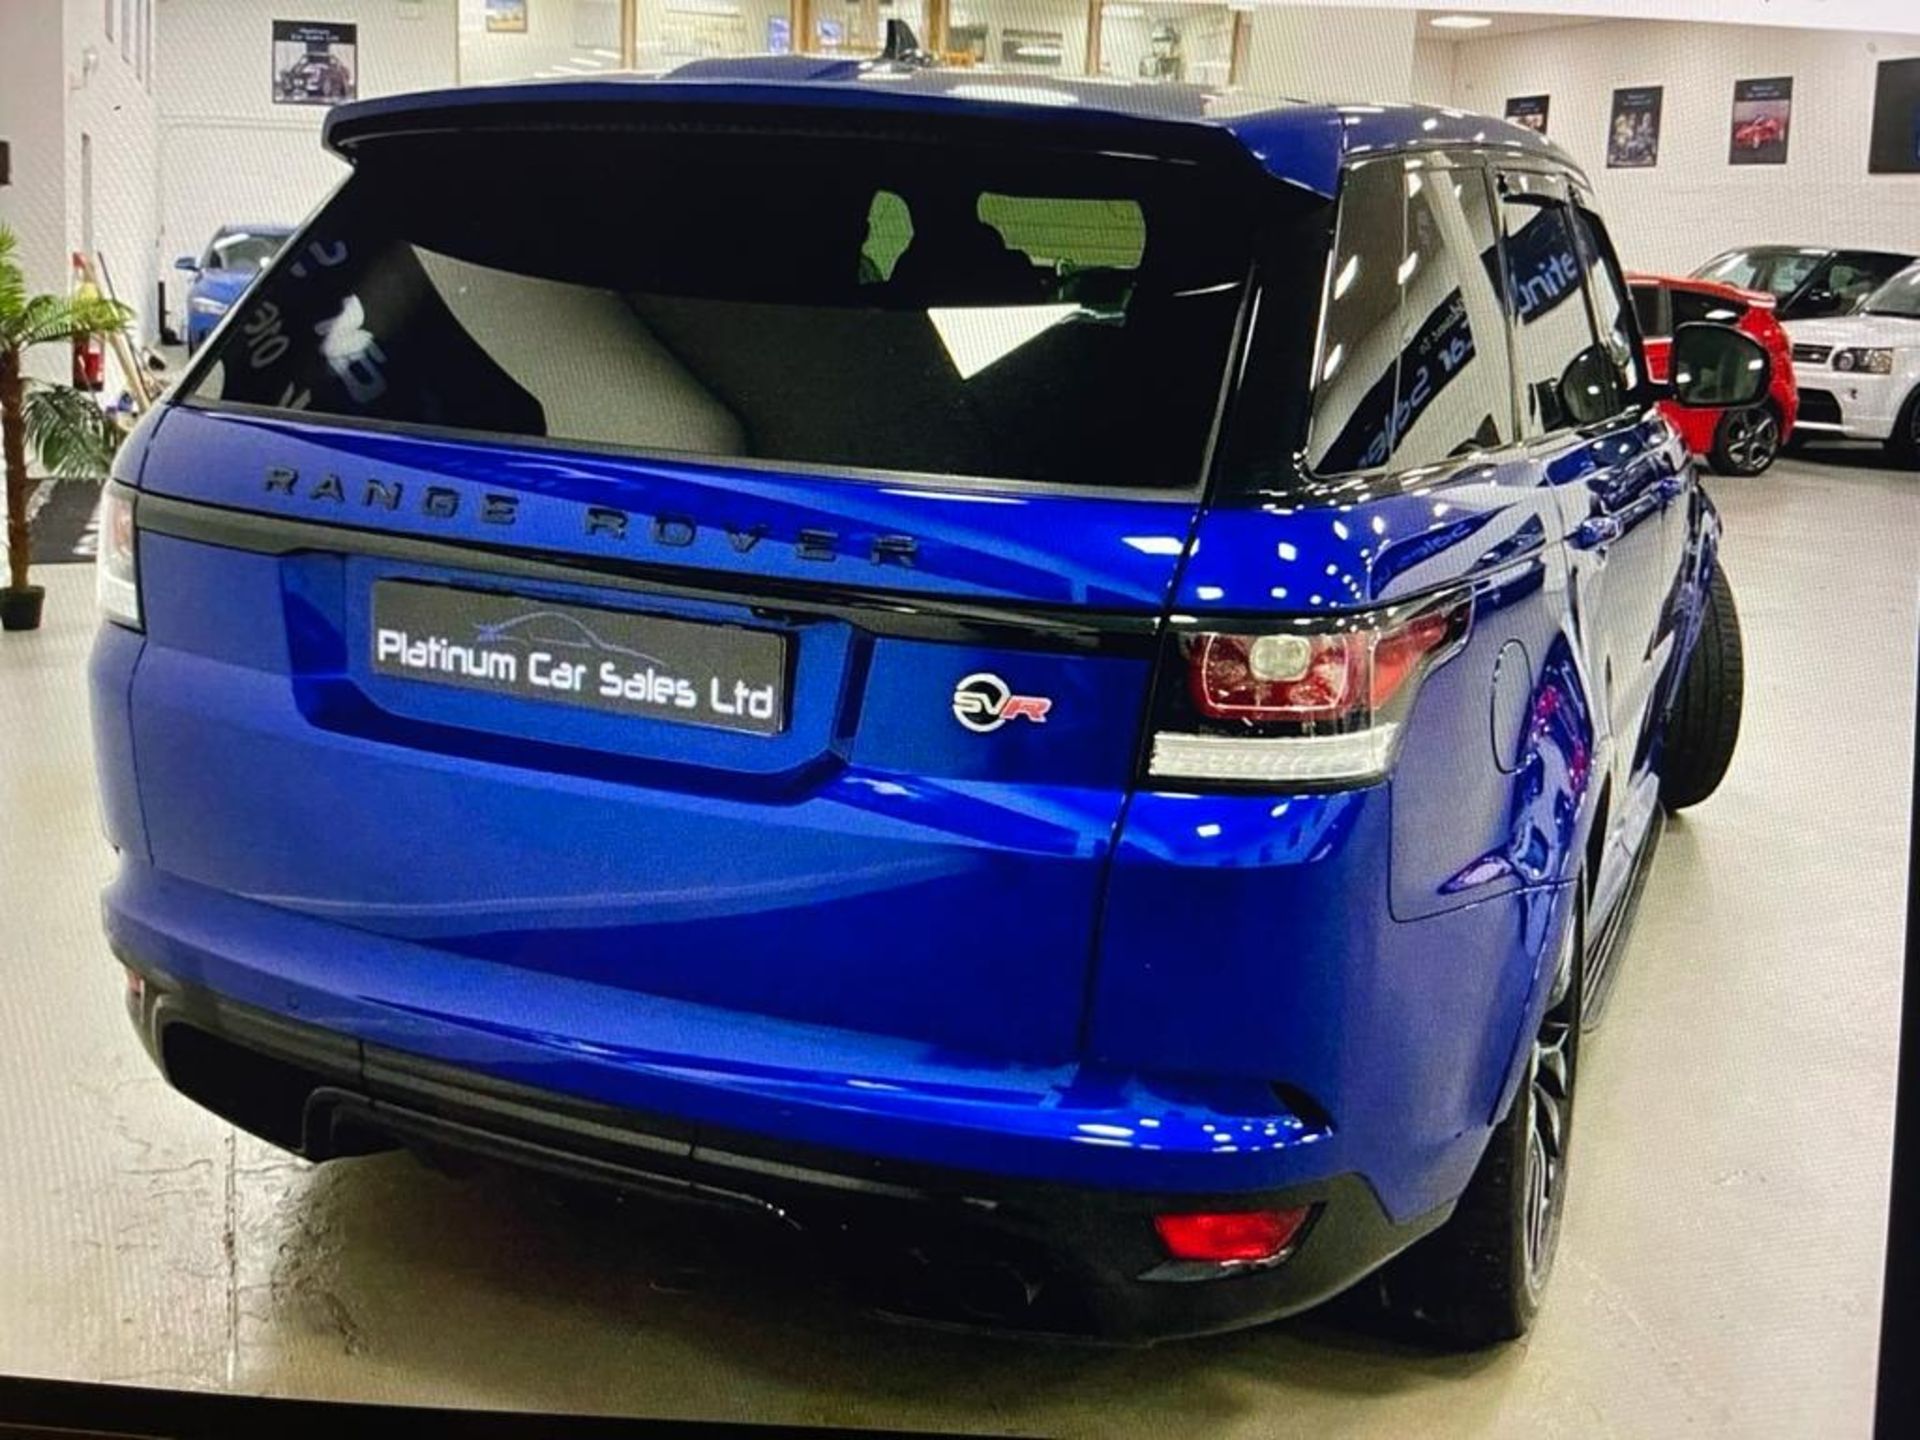 2016 RANGE ROVER SPORT SVR AUTOBIOGRAPHY DYNAMIC V8 SUPERCHARGED AUTOMATIC 5.0 550PS PETROL ENGINE - Image 15 of 28